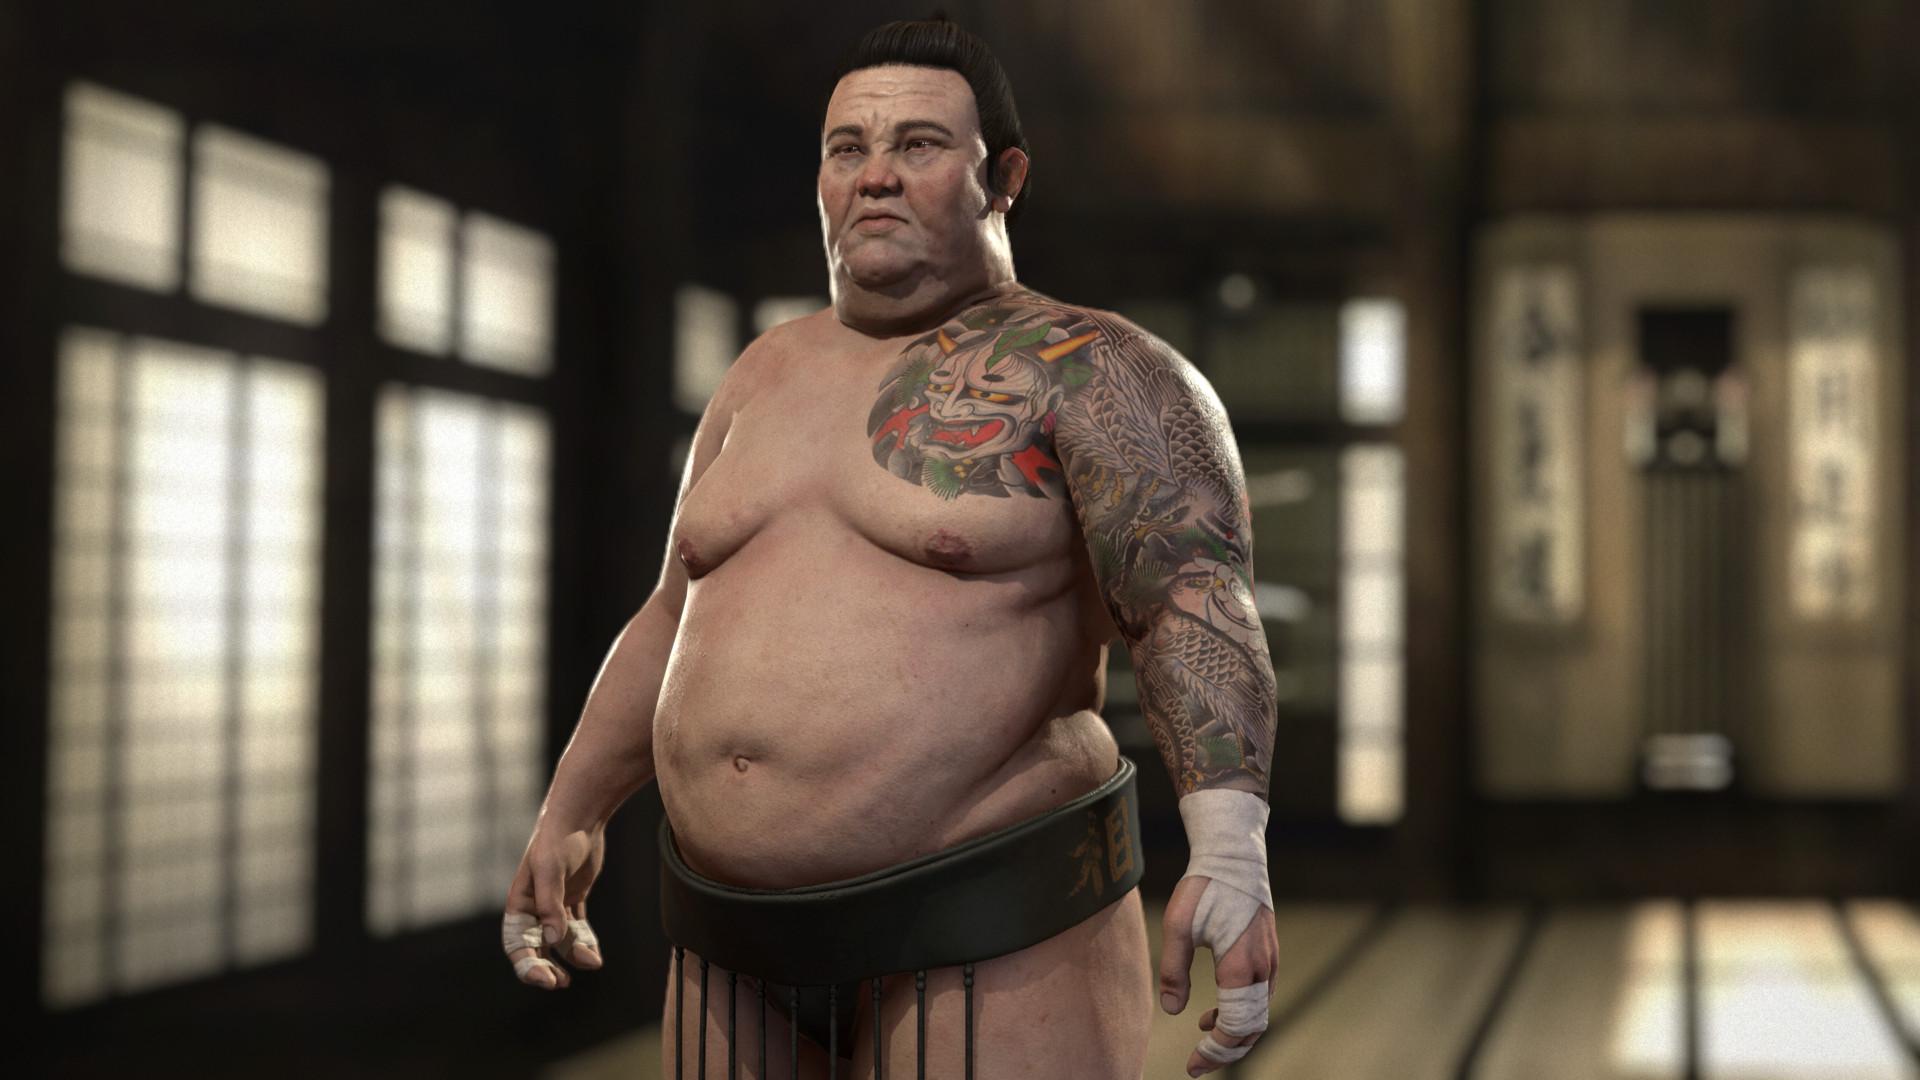 Sumo Wrestler Game ready Character, Andre Pires